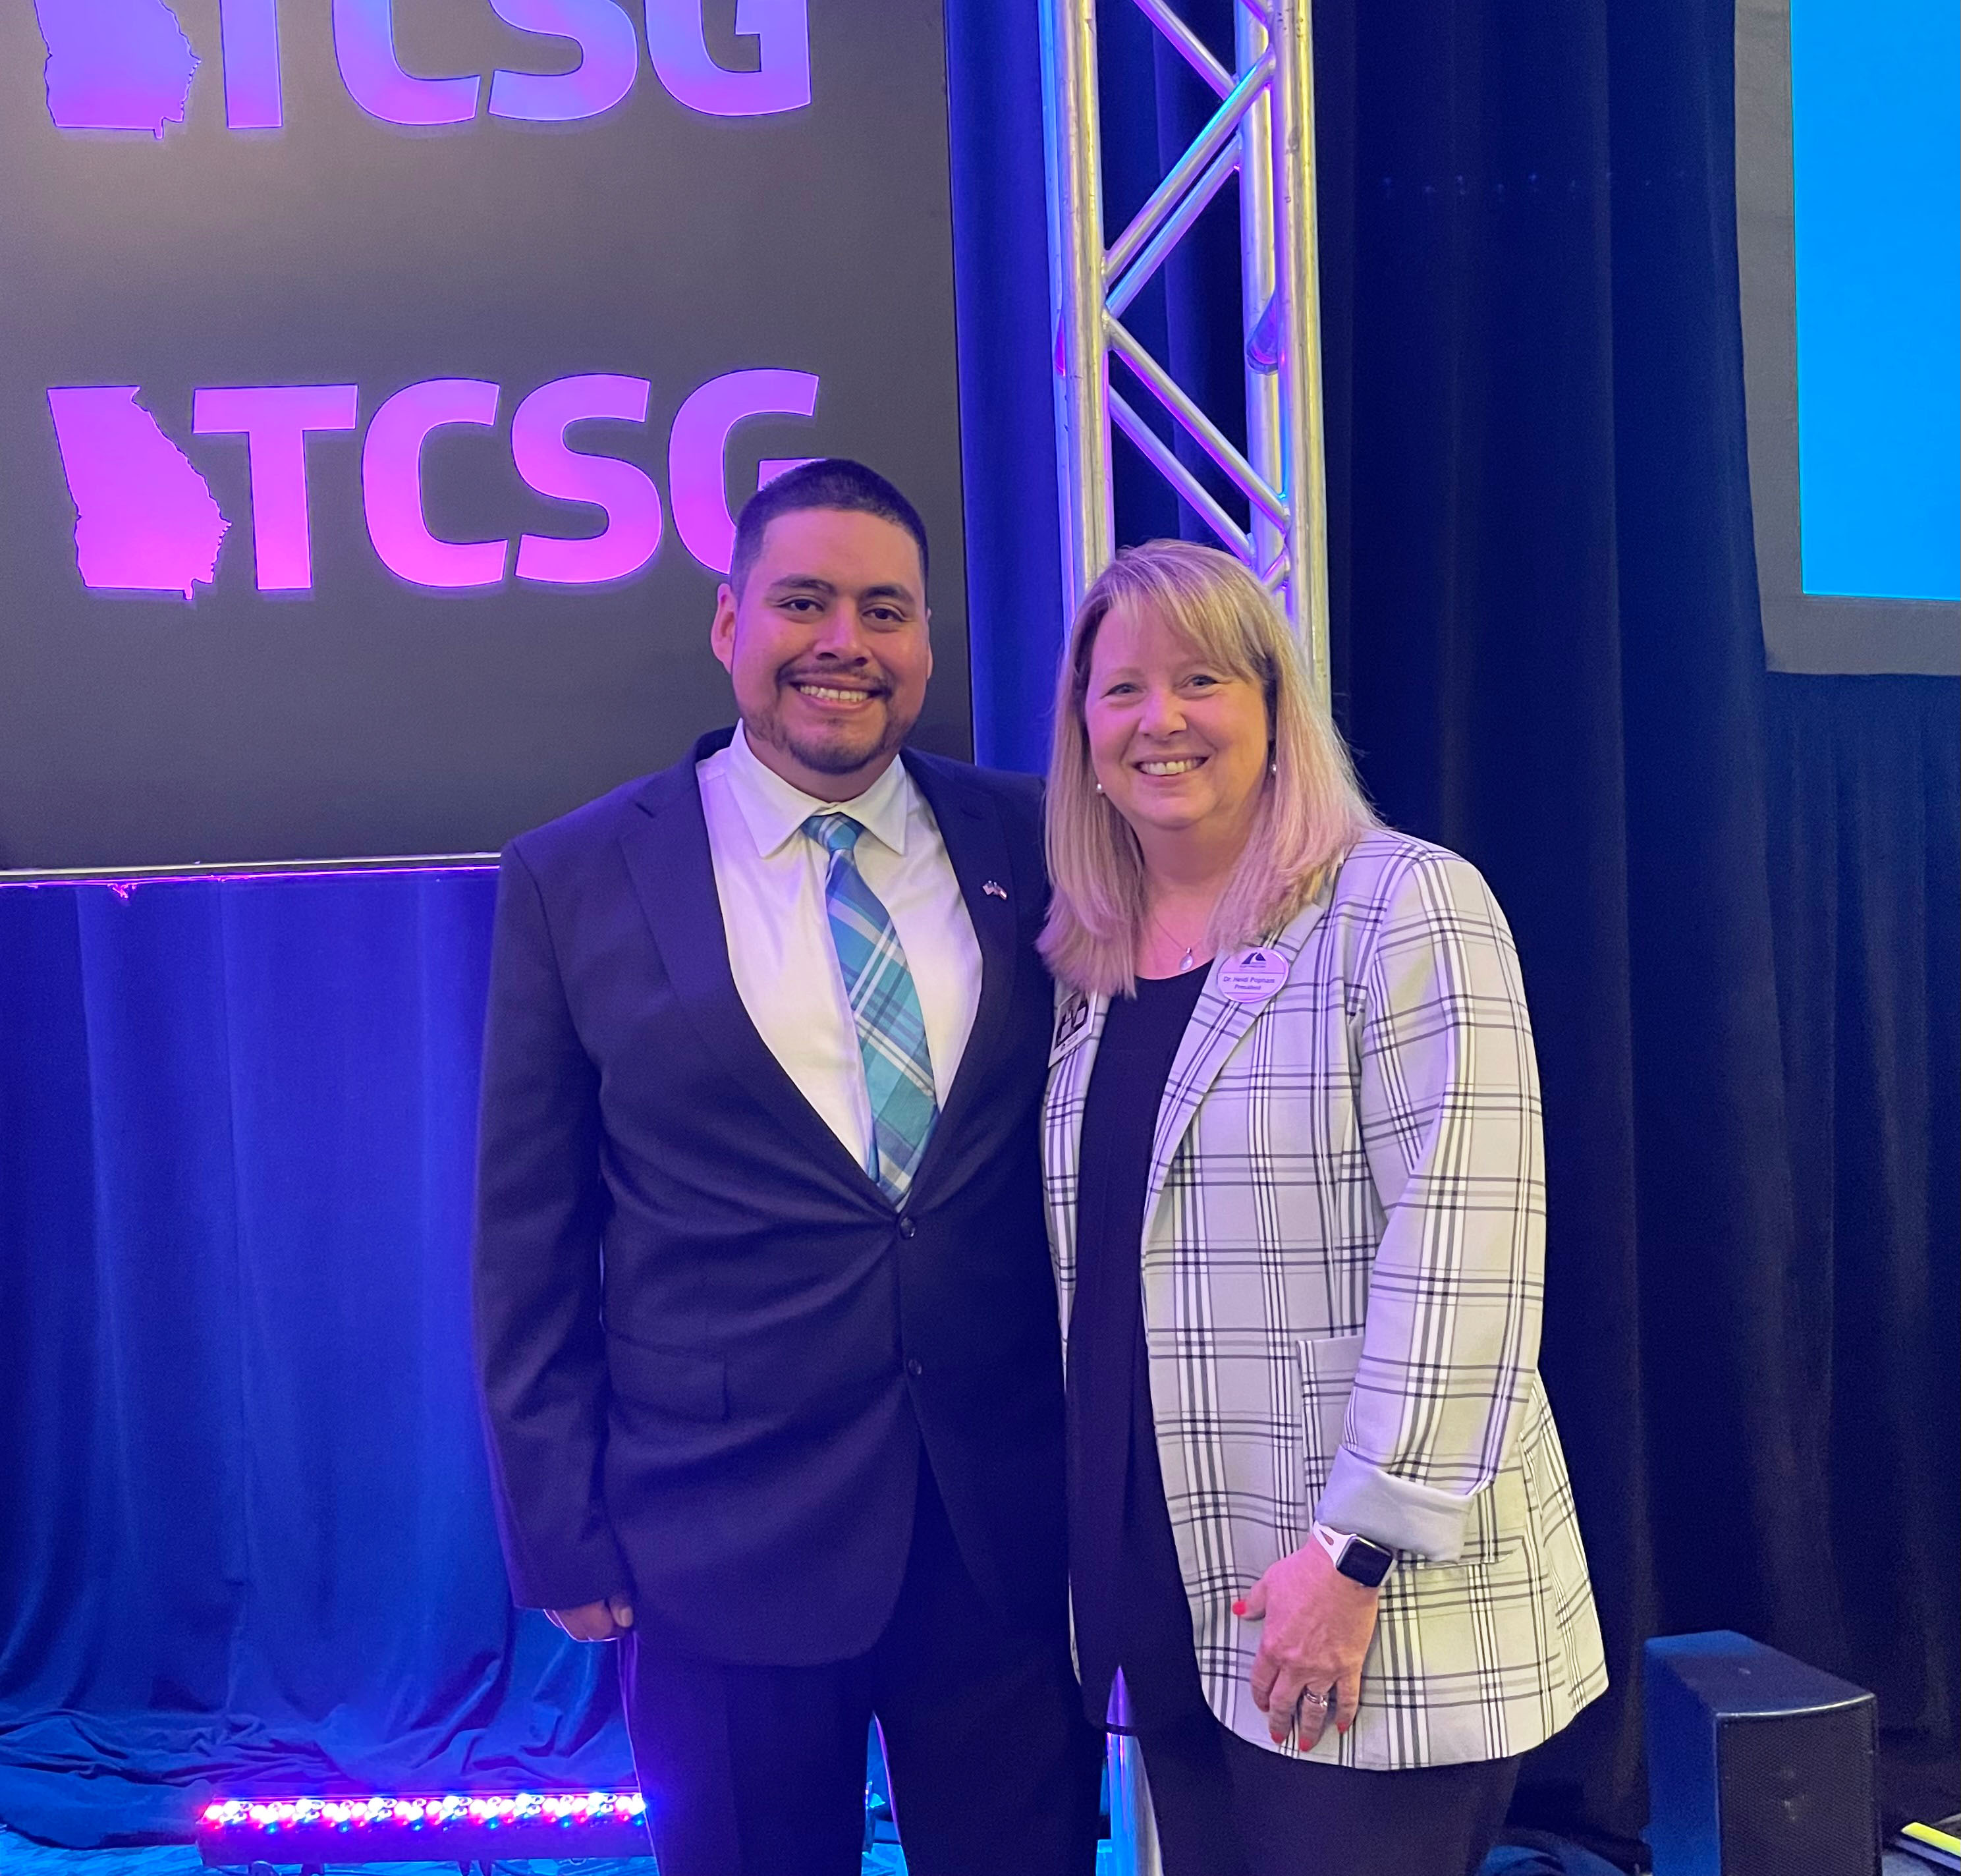 Salvador Gonzalez (left), program director and instructor of Diesel Equipment Technology at Georgia Northwestern Technical College (GNTC), stands with Dr. Heidi Popham, president of GNTC, after being named First Runner-Up for the Technical College System of Georgia’s 2023 Rick Perkins Instructor of the Year.